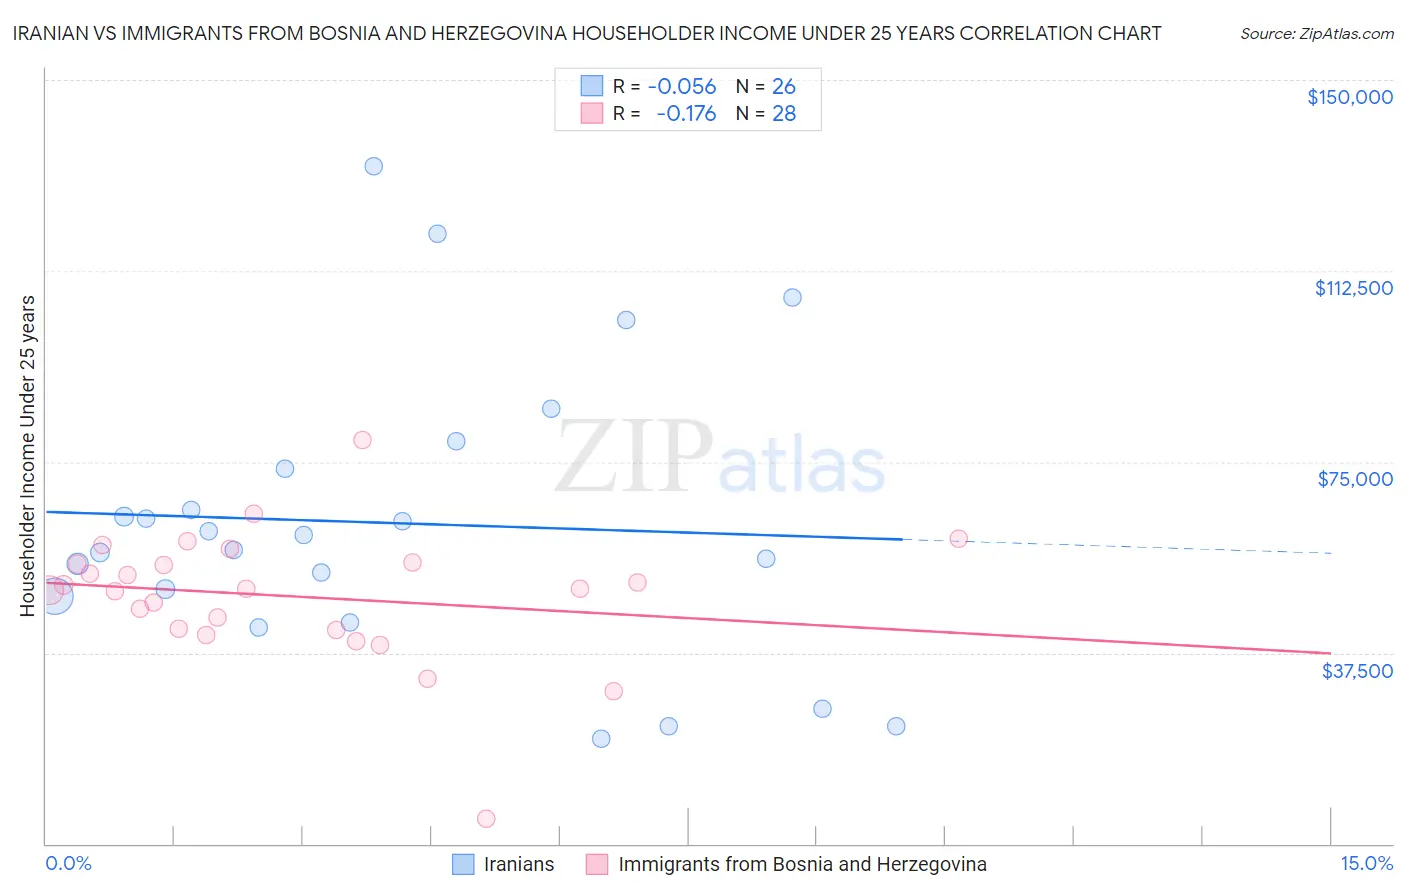 Iranian vs Immigrants from Bosnia and Herzegovina Householder Income Under 25 years